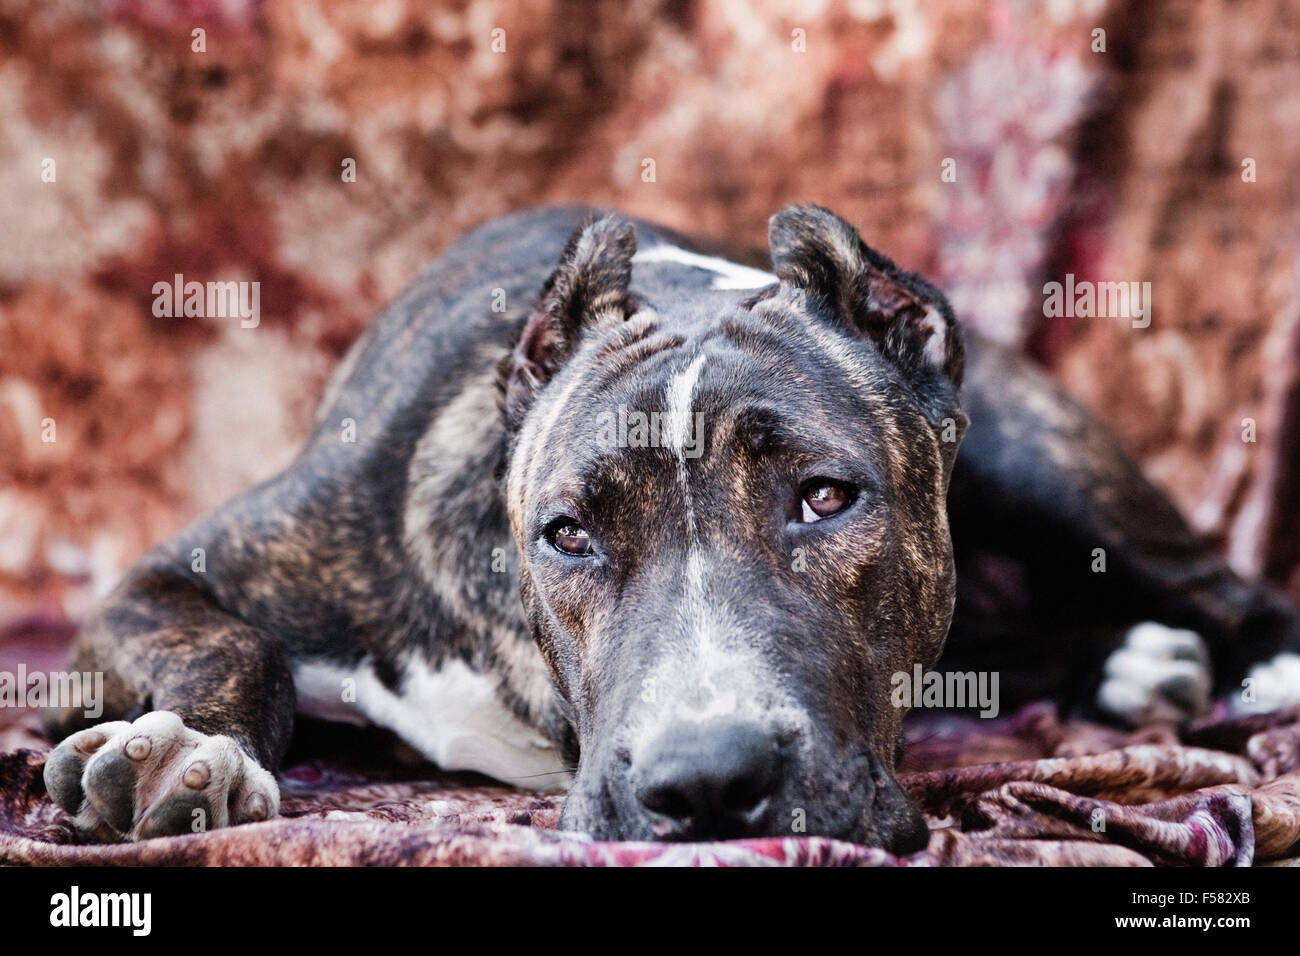 Brindle Cane Corso Puppy Walking Outdoors Stock Image - Image of brindle,  looking: 43569055